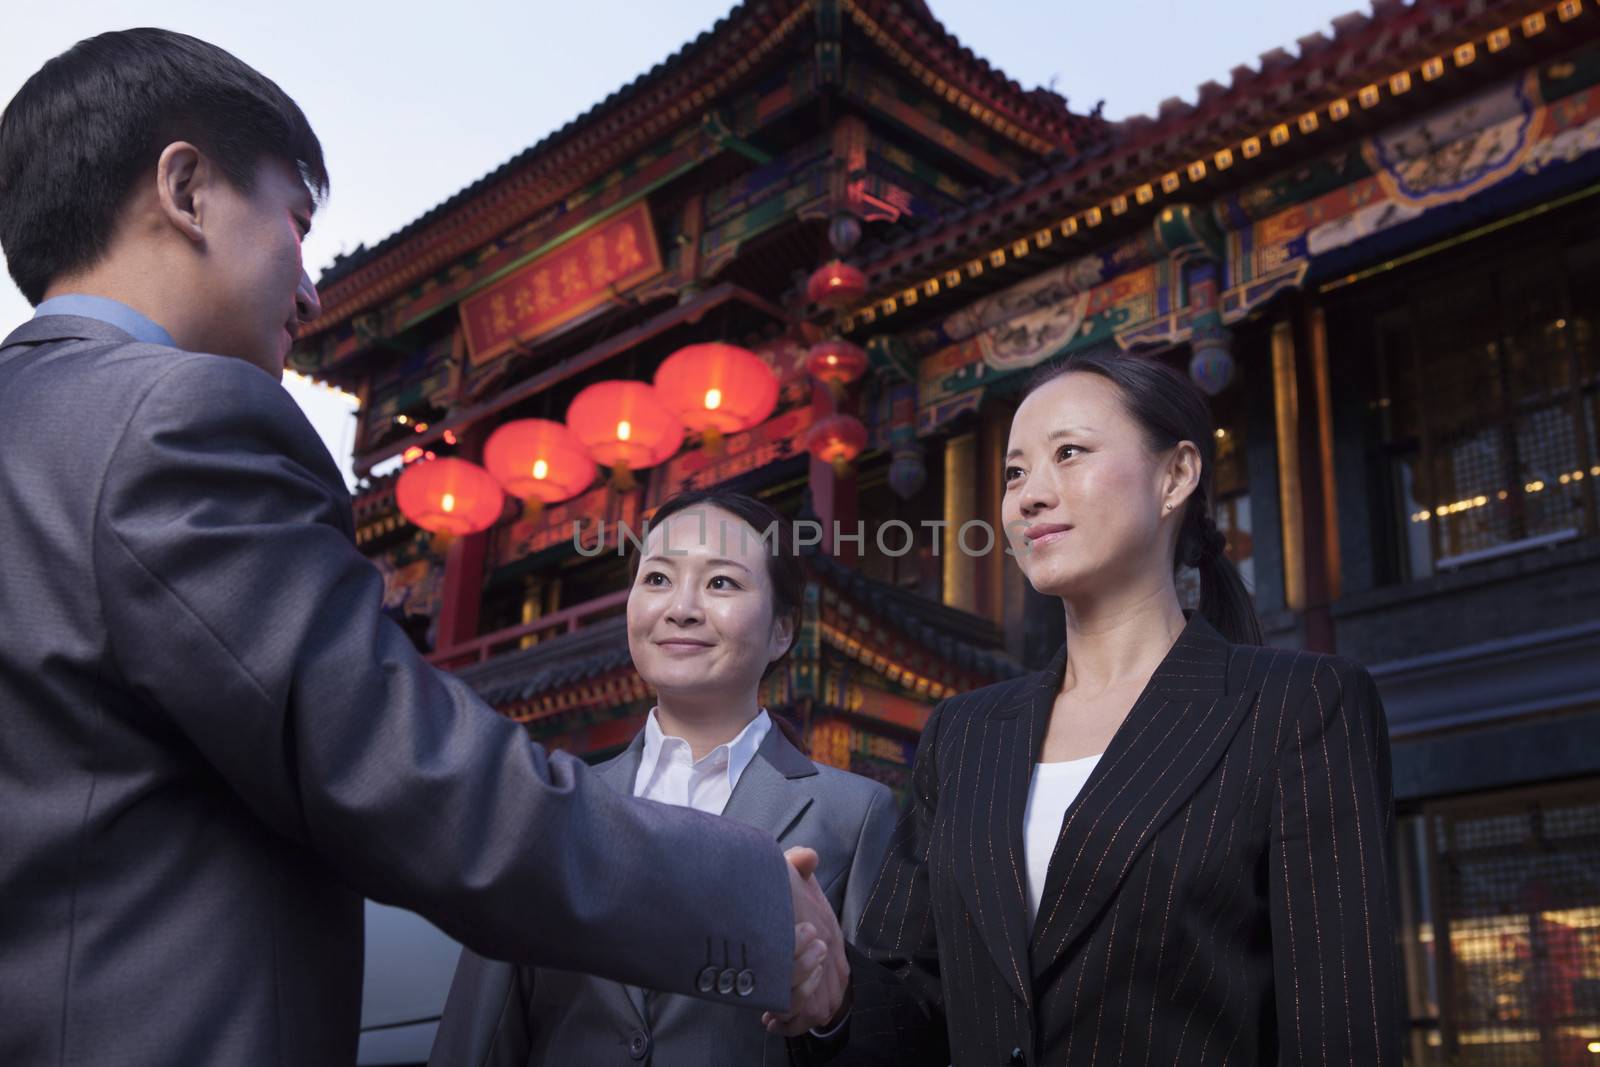 Three businesspeople meeting outdoors with Chinese architecture in background.